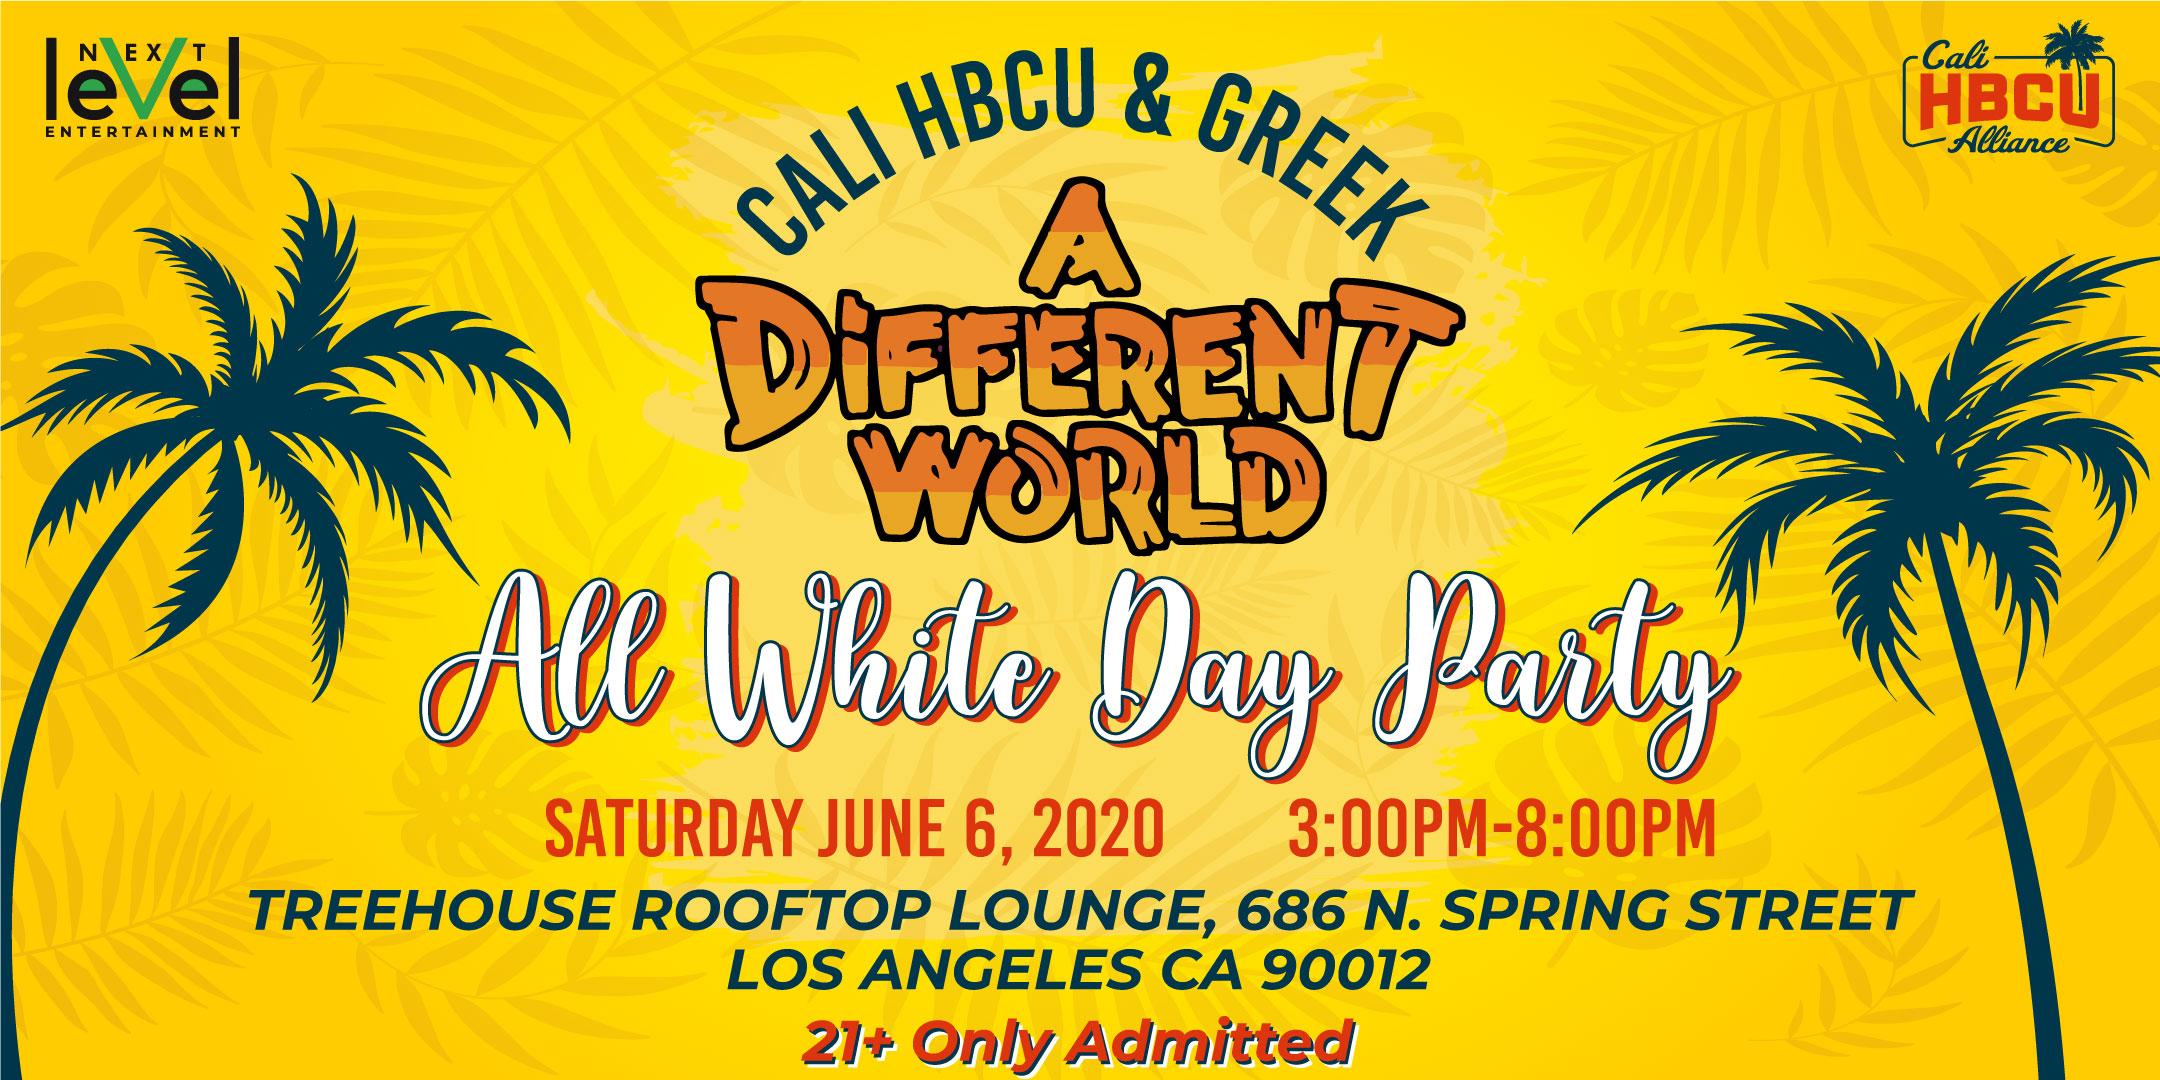 CALI HBCU & GREEK ALL WHITE DAY PARTY